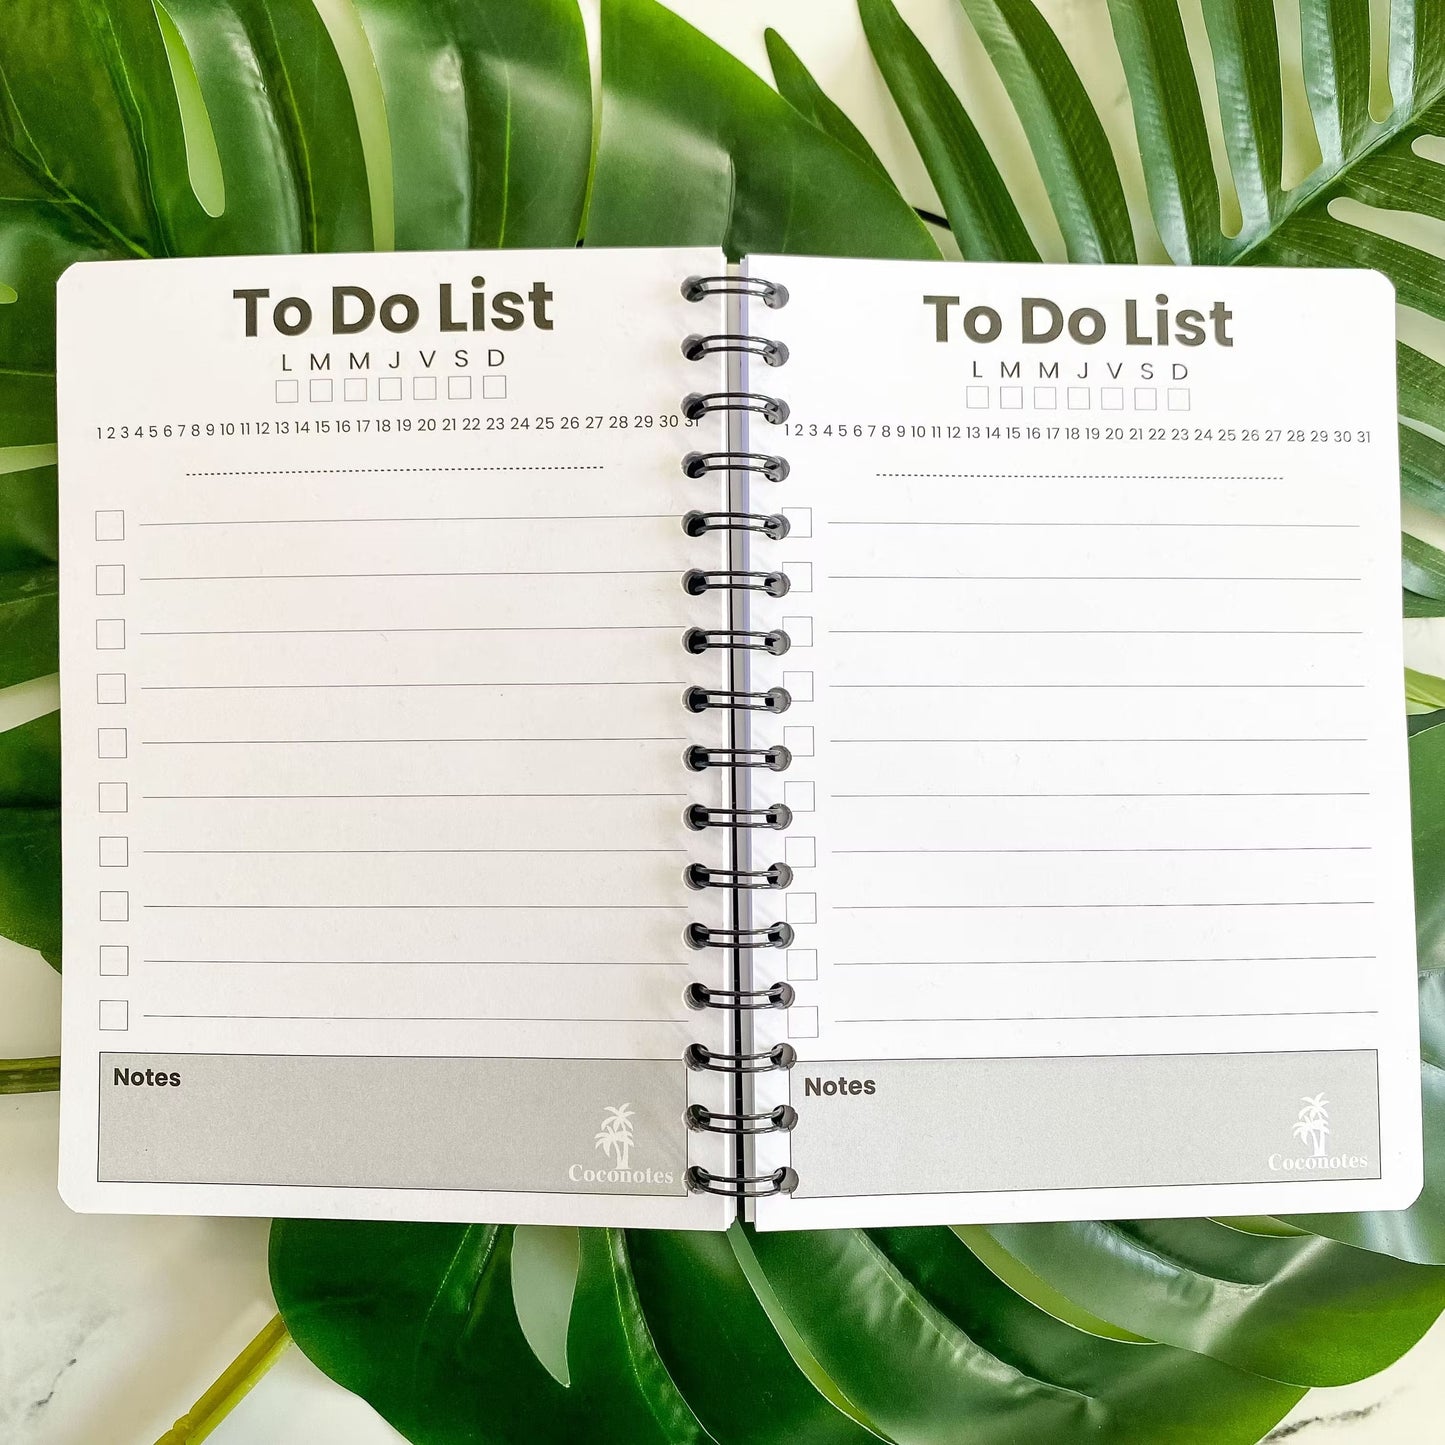 To Do List Notebook Plume model